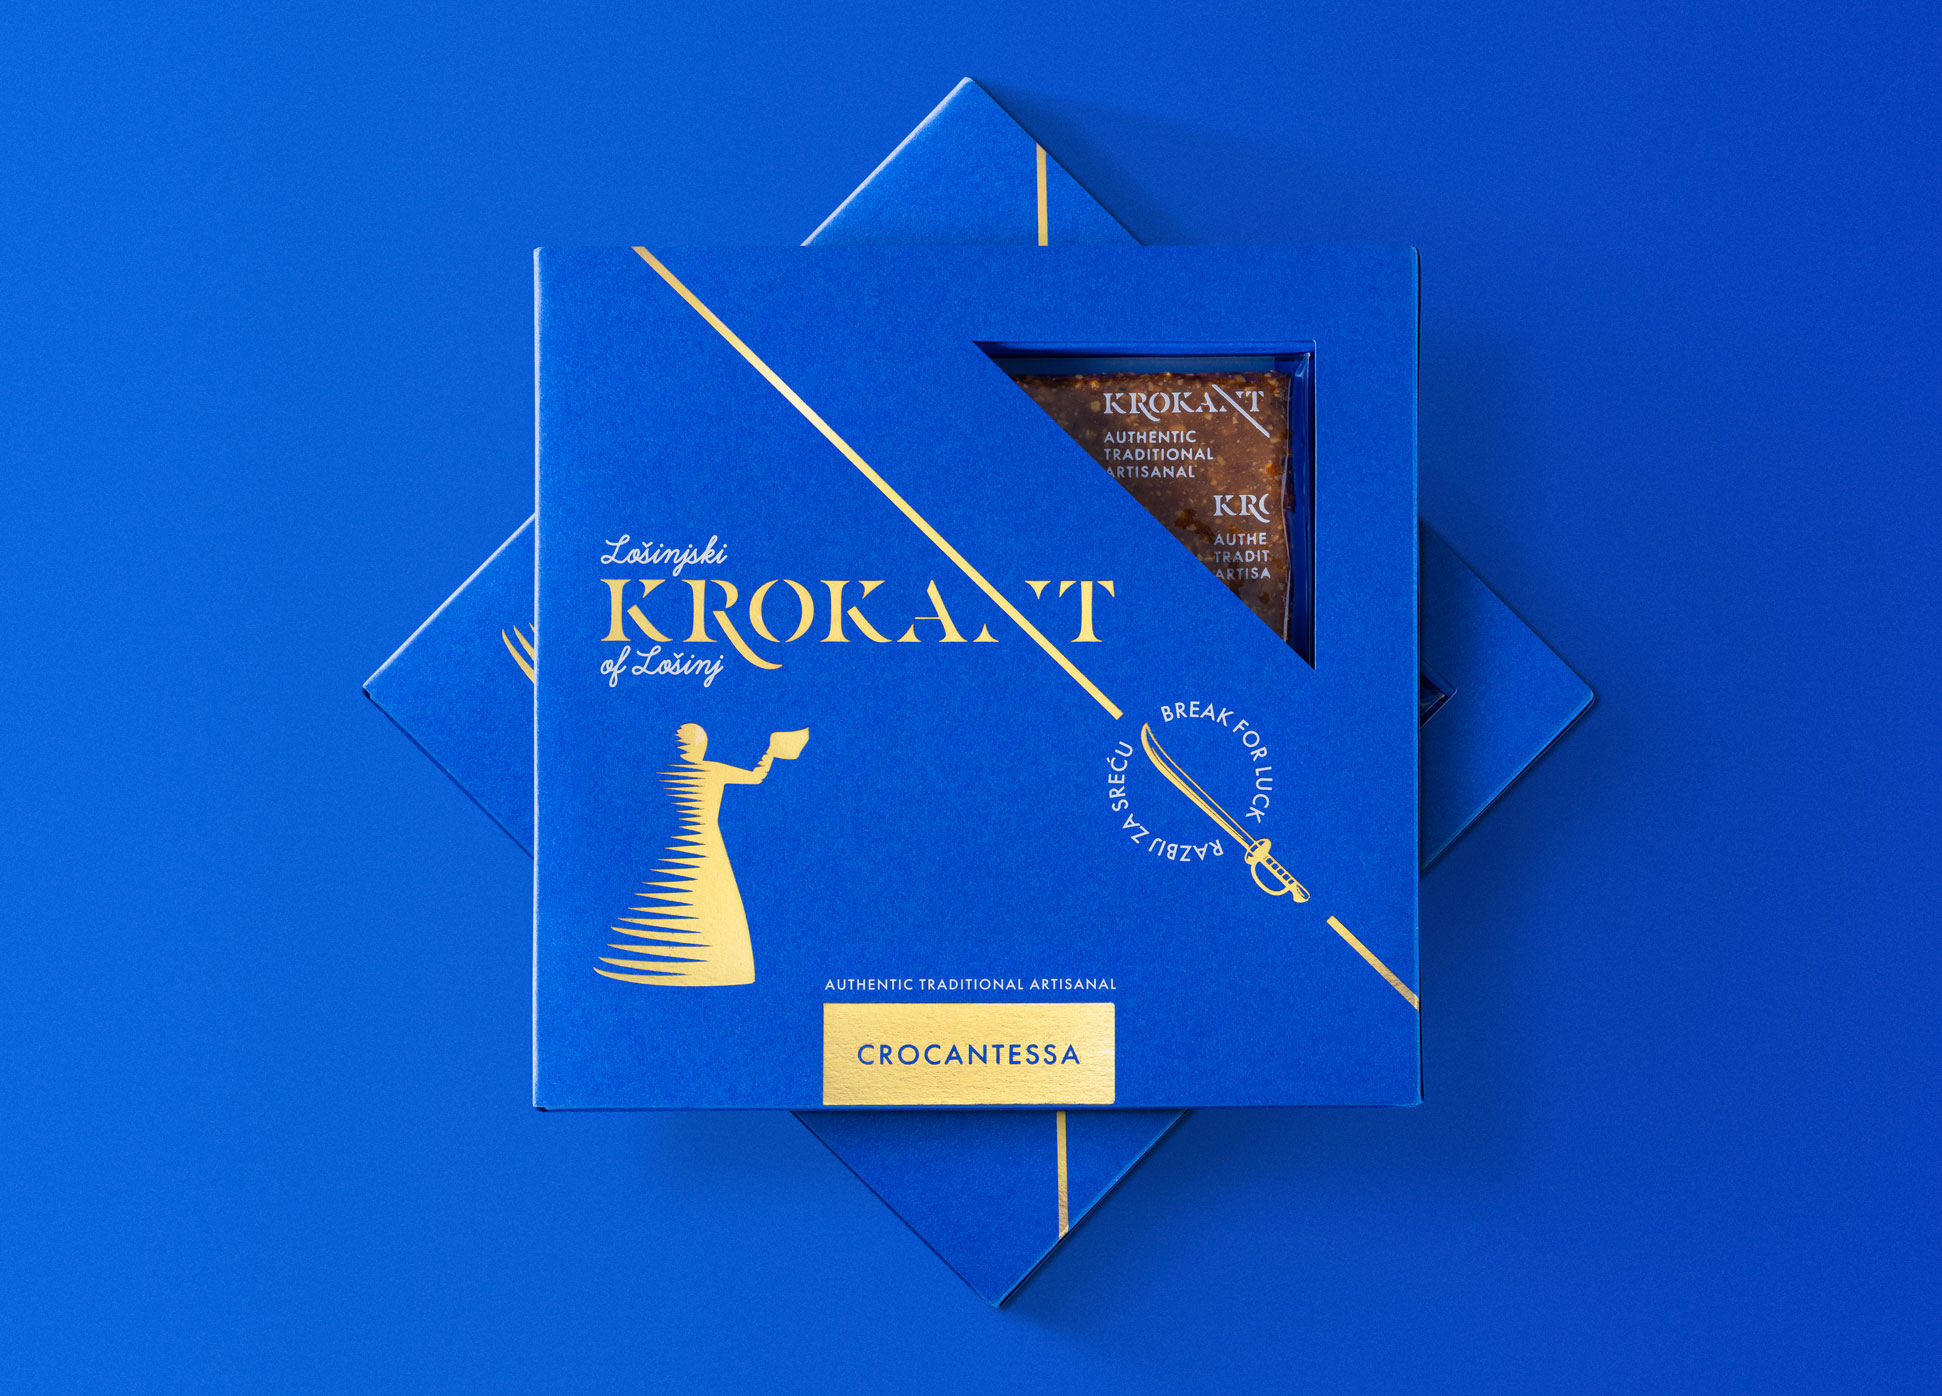 Krokant of Lošinj Identity and Packaging – Connecting Maritime Tradition With Modern Design